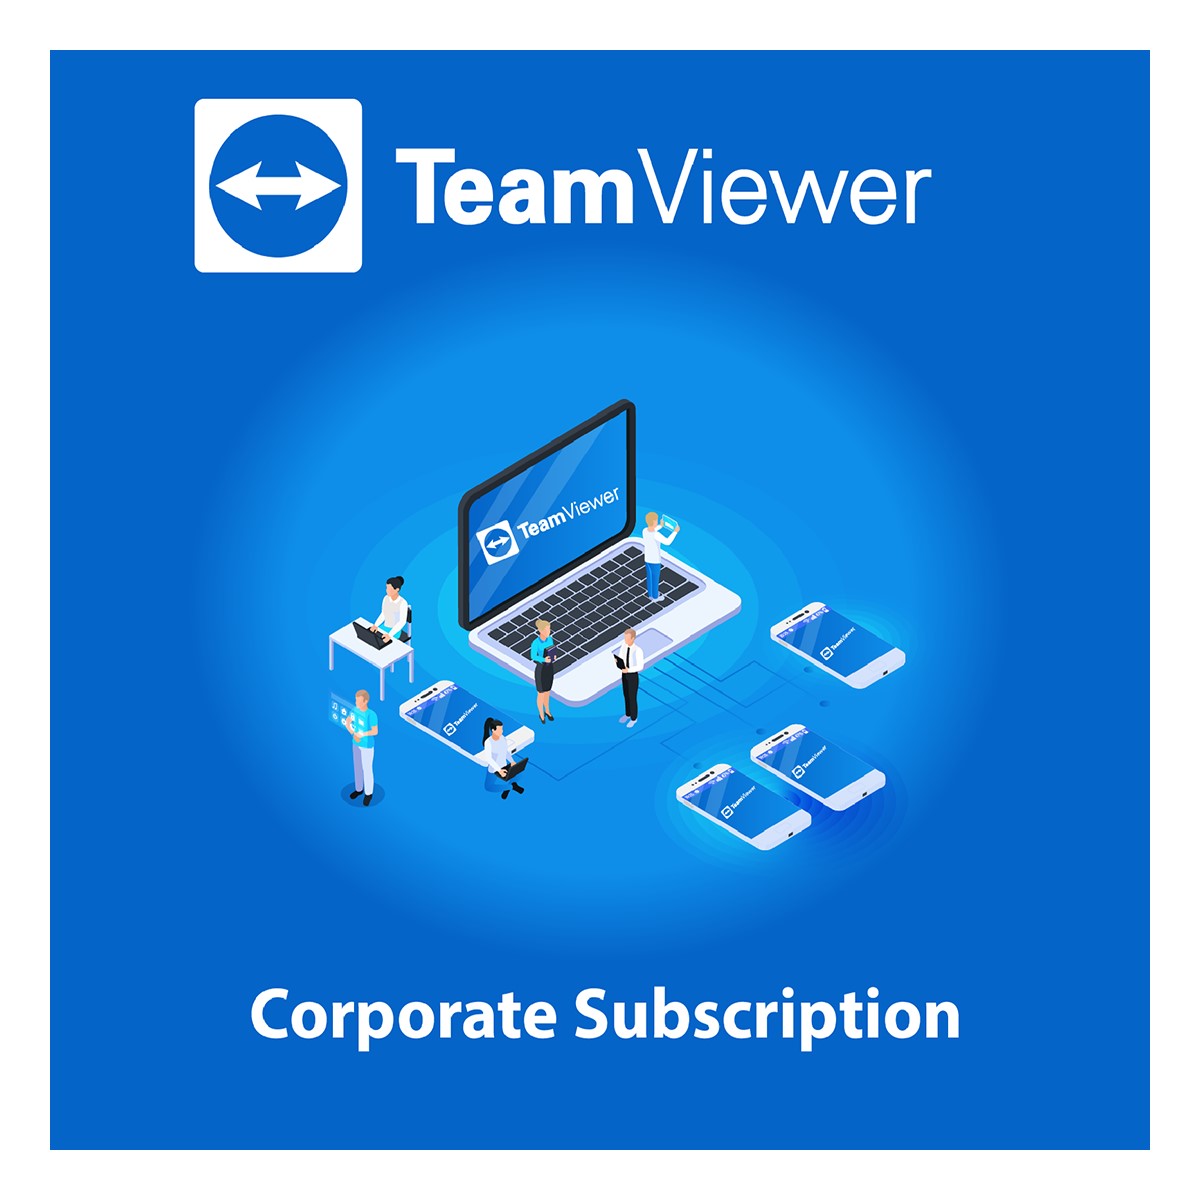 TEAMVIEWER CORPORATE SUBSCRIPTION (TVC0020)